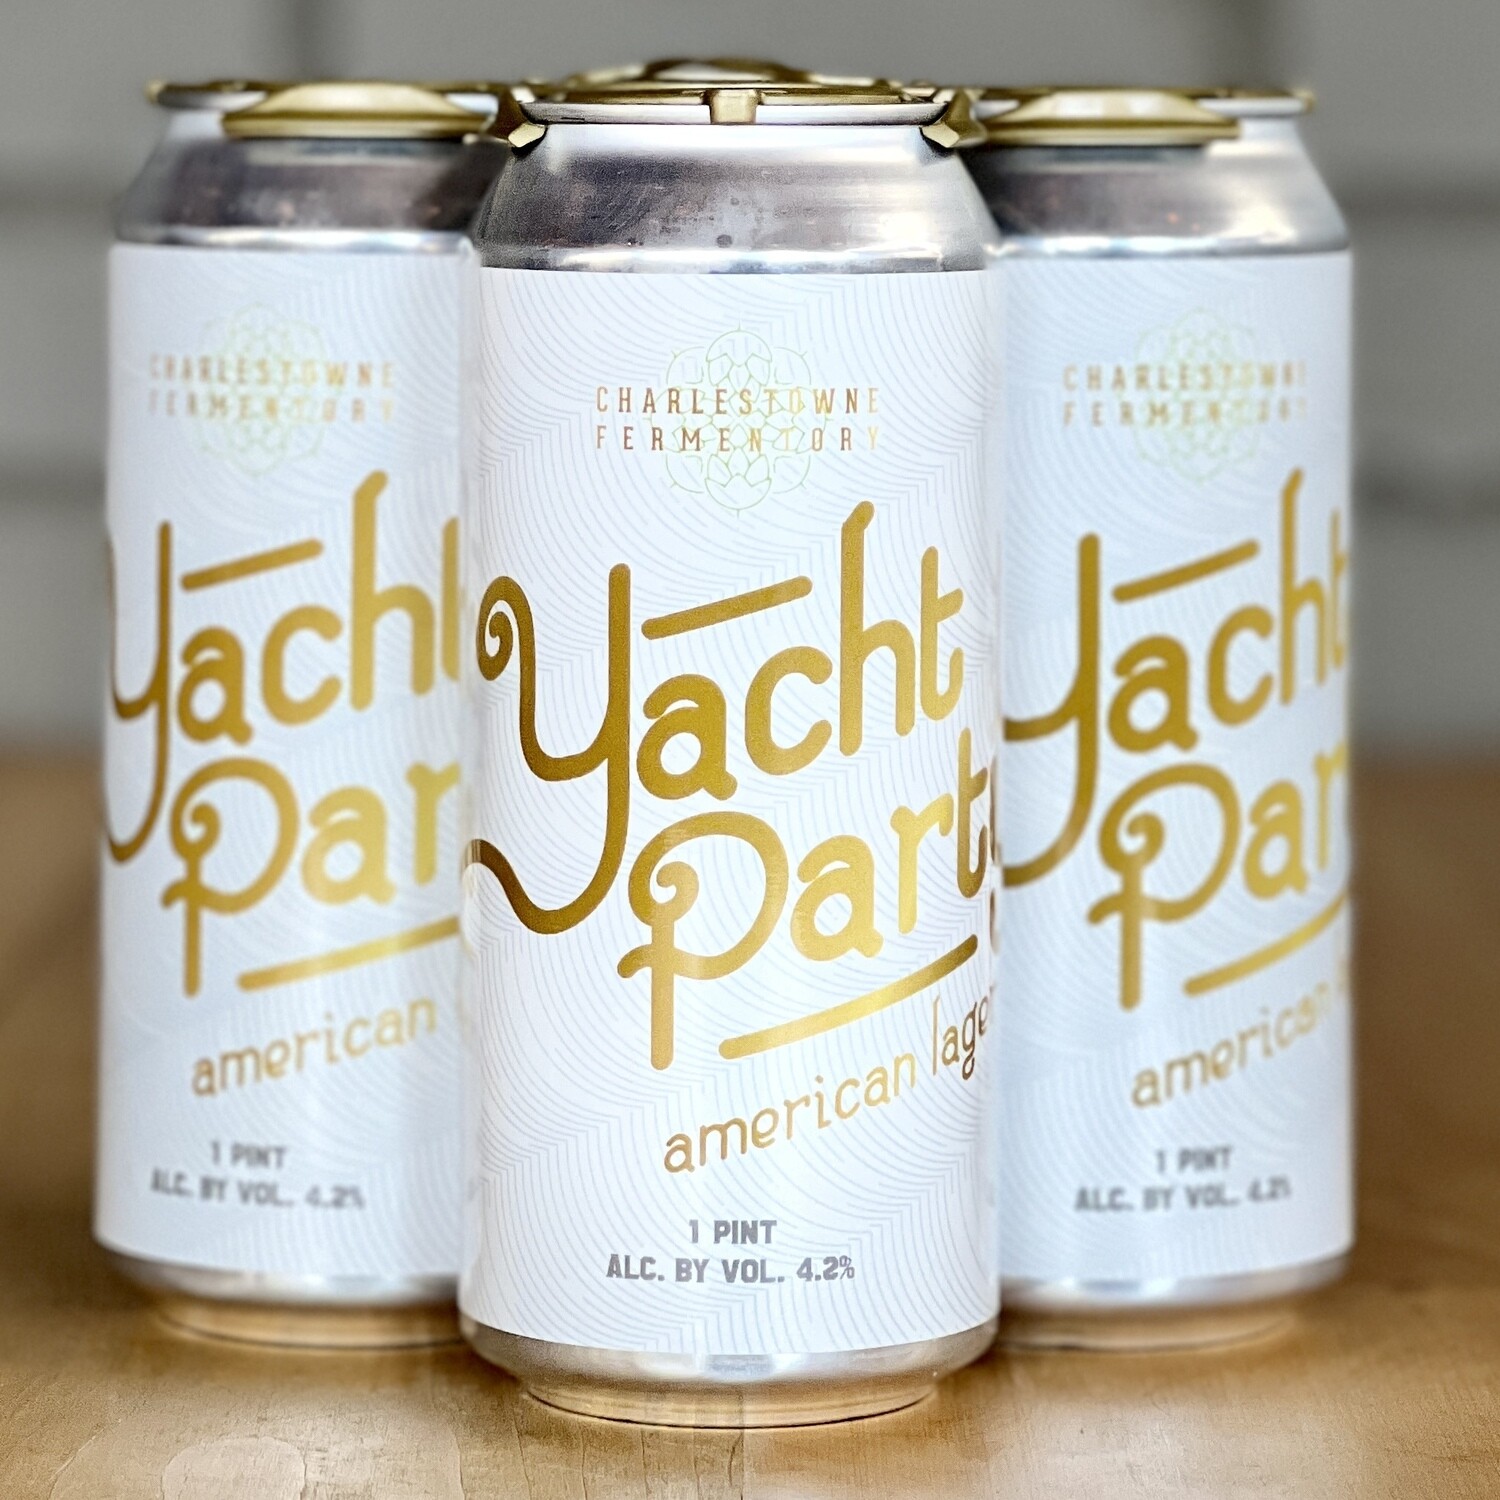 Charles Towne Fermentory Yacht Party (4pk)